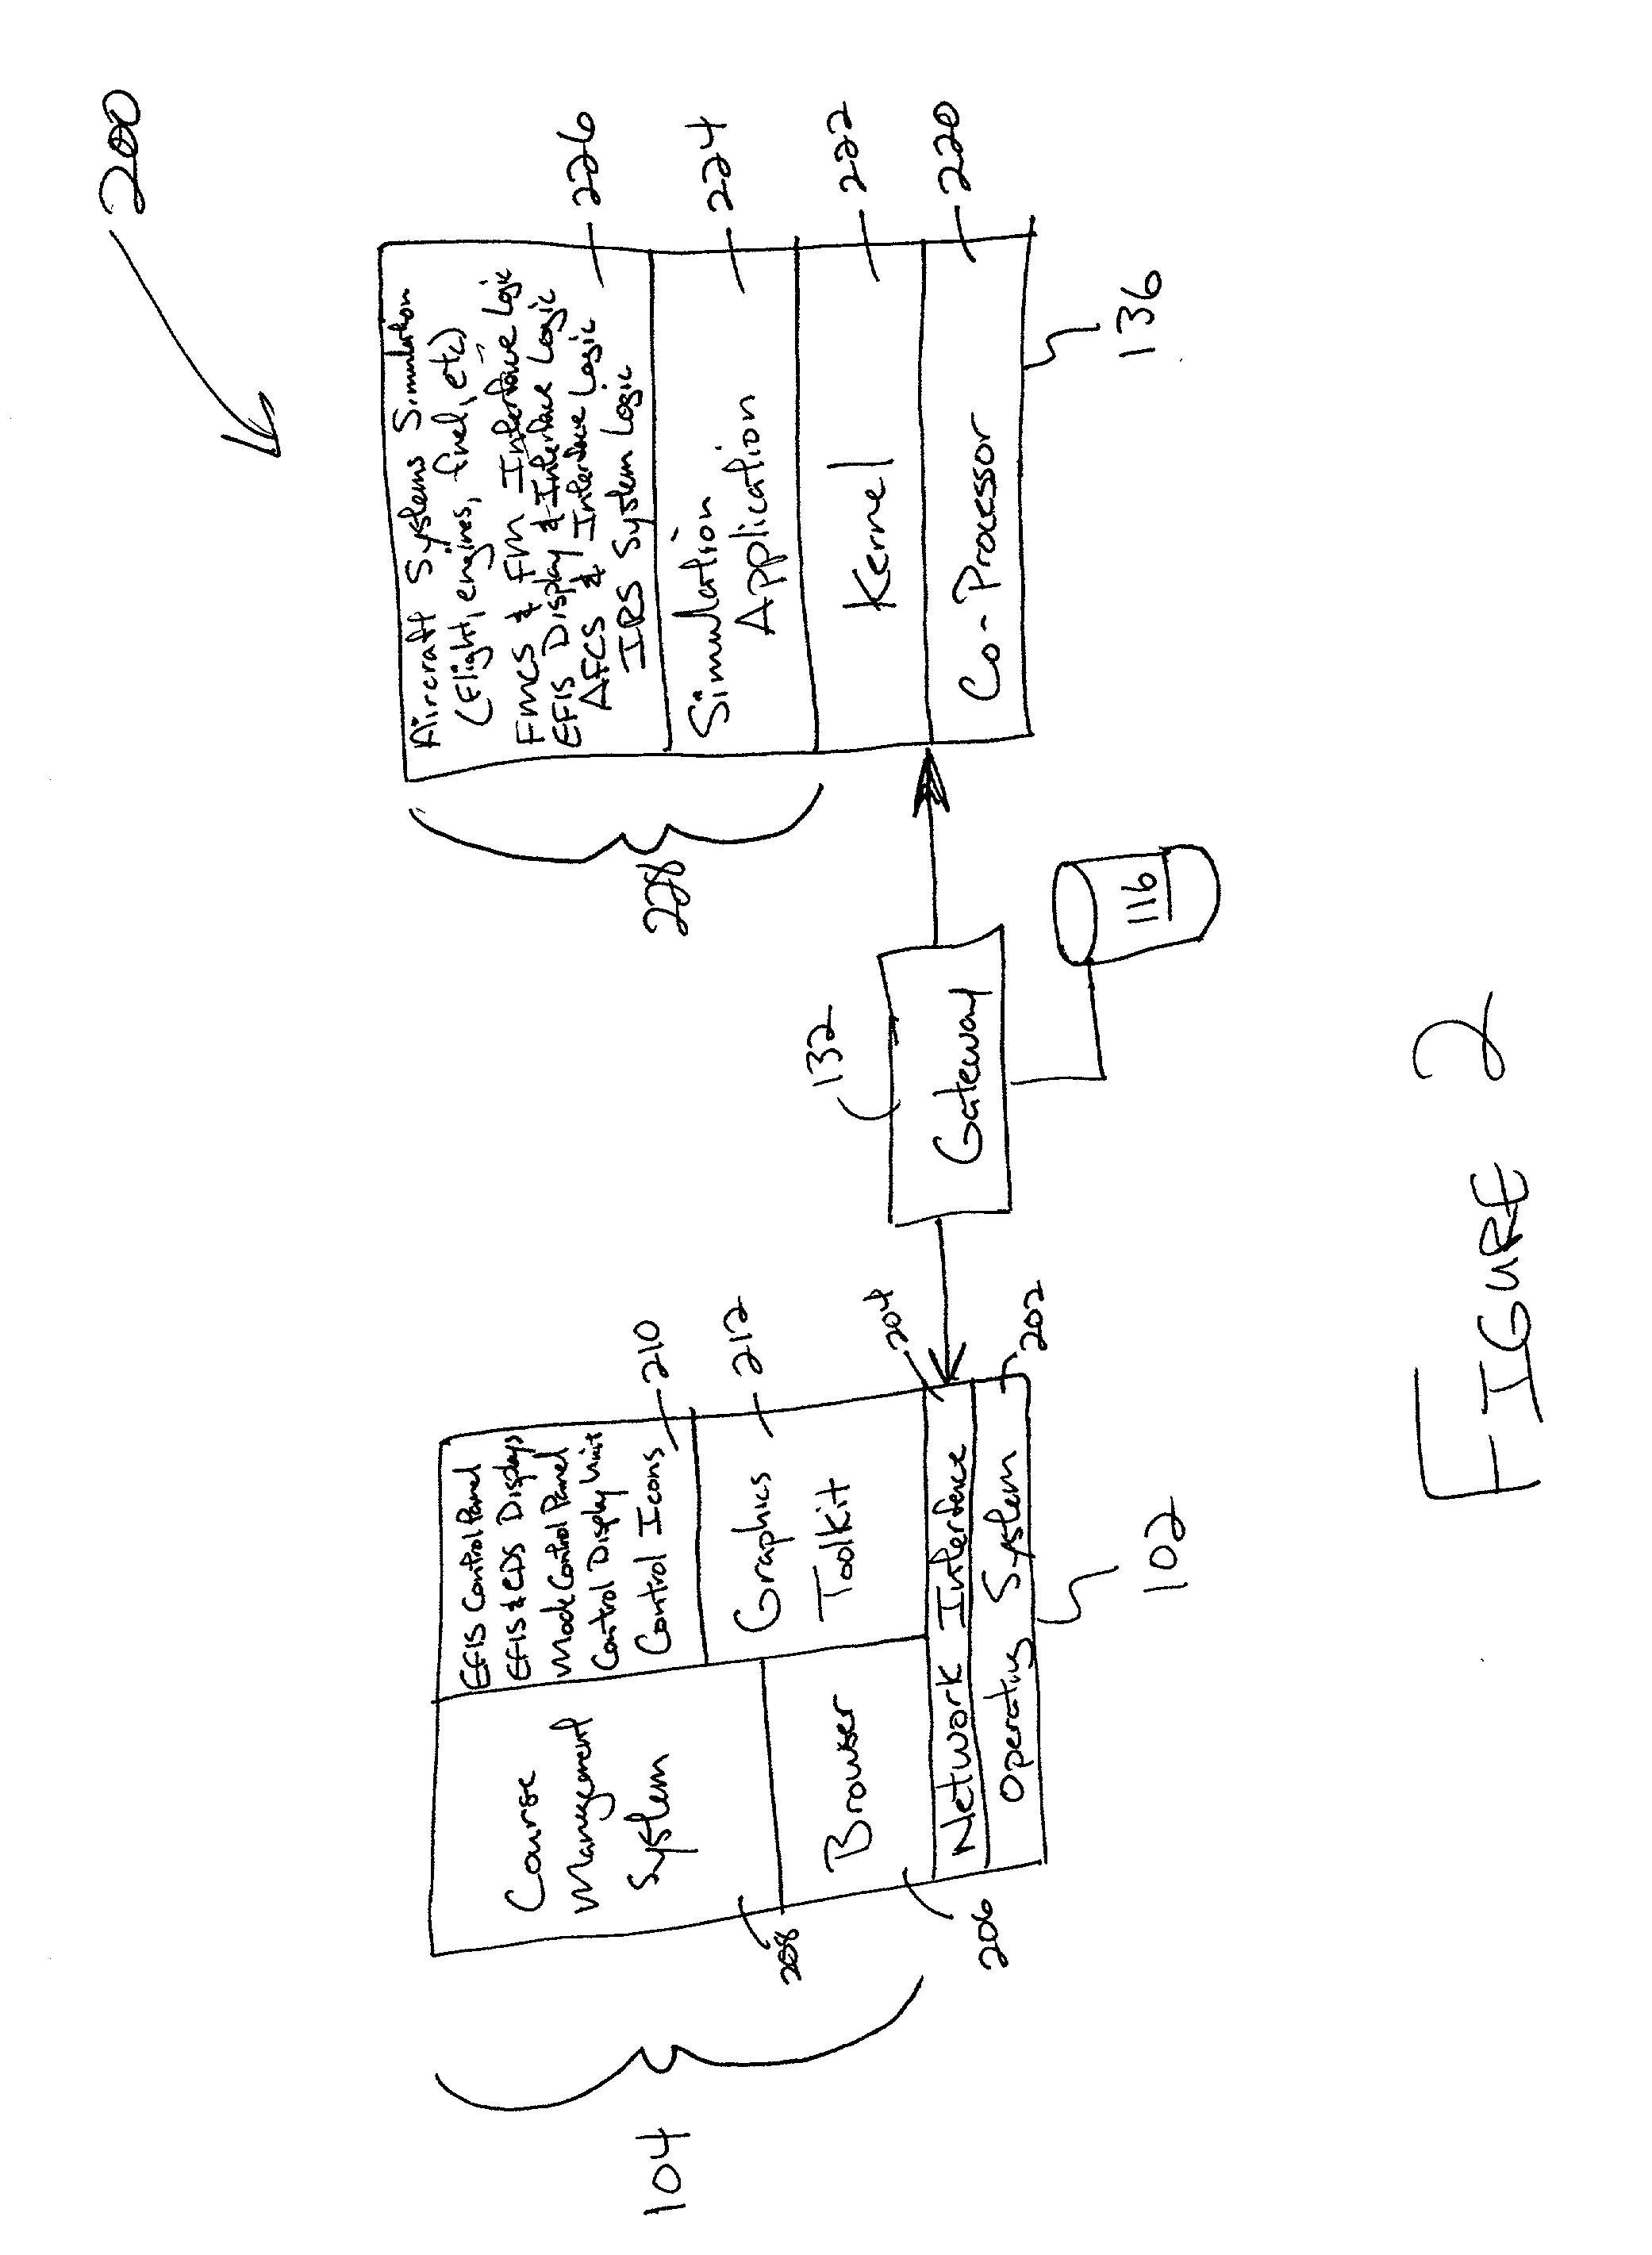 Pilot internet practice system and methods